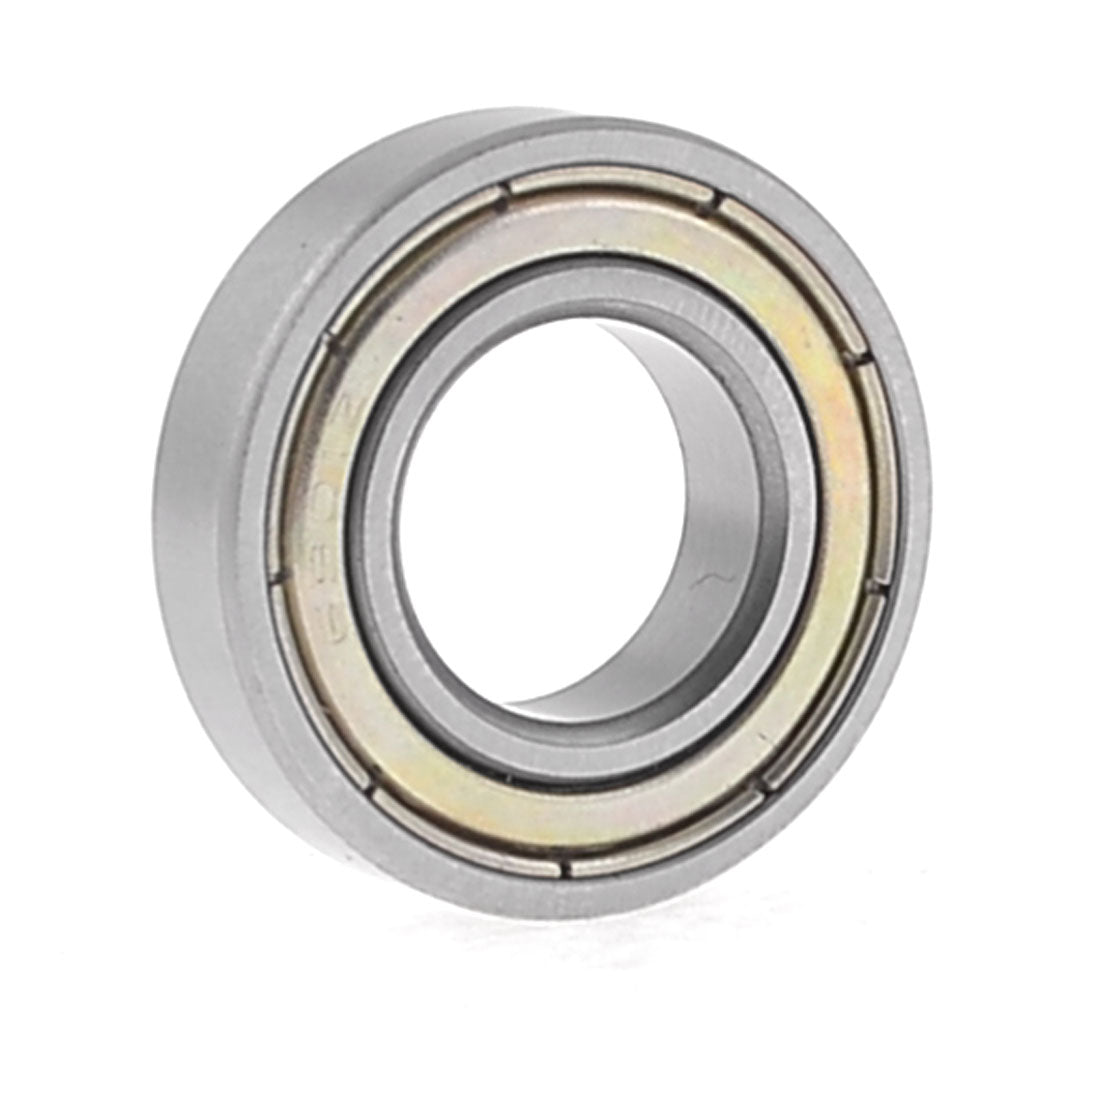 uxcell Uxcell Parts 6901Z Metal Shielded Deep Groove Ball Bearing 24mm x 12mm x 6mm